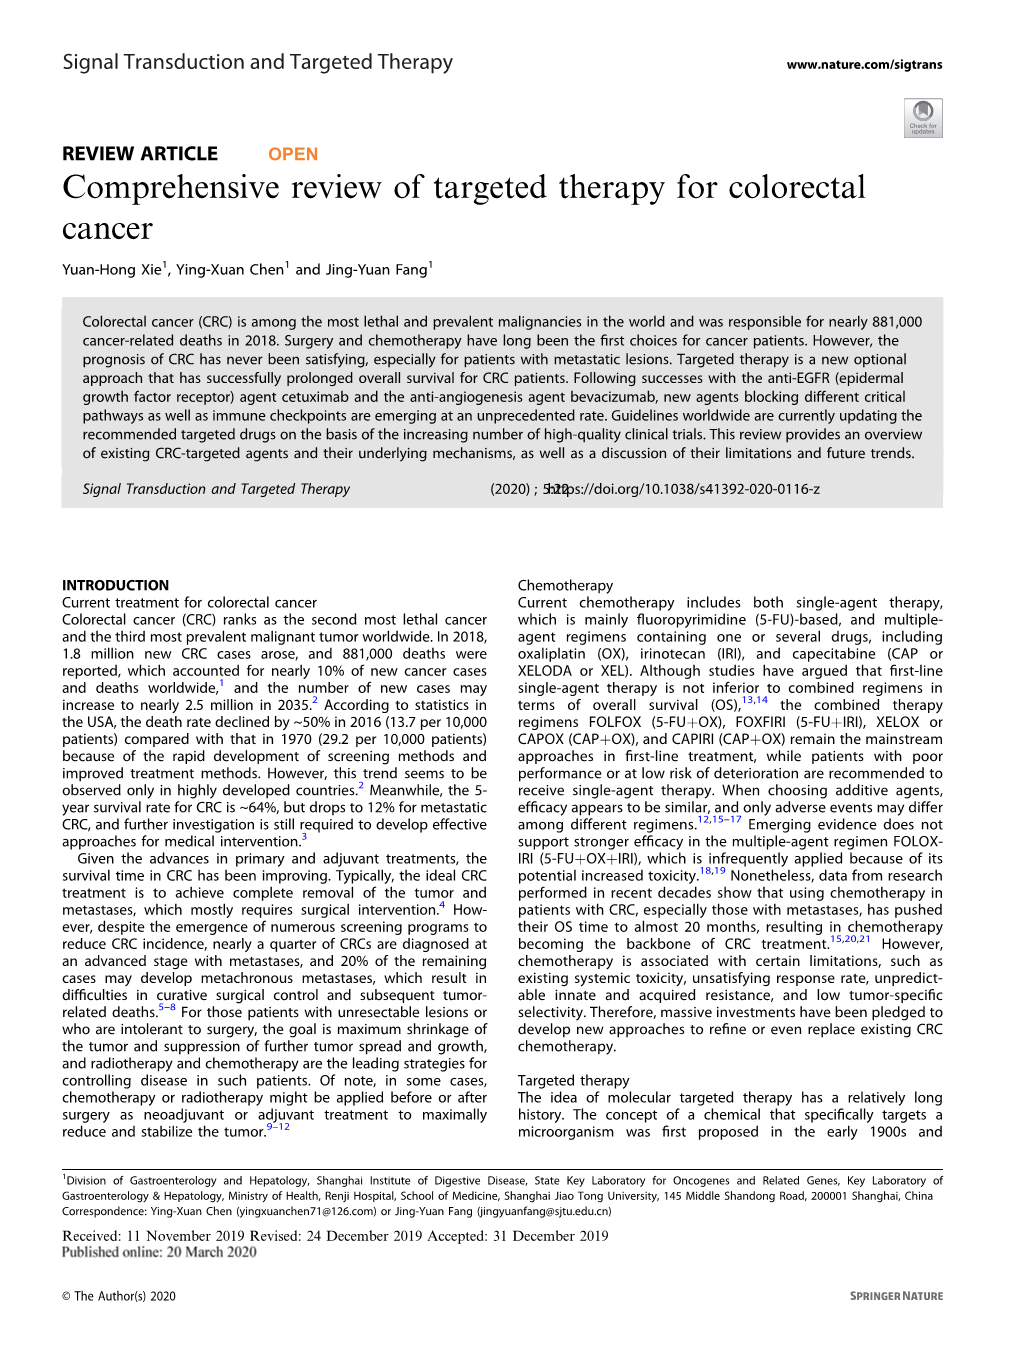 Comprehensive Review of Targeted Therapy for Colorectal Cancer